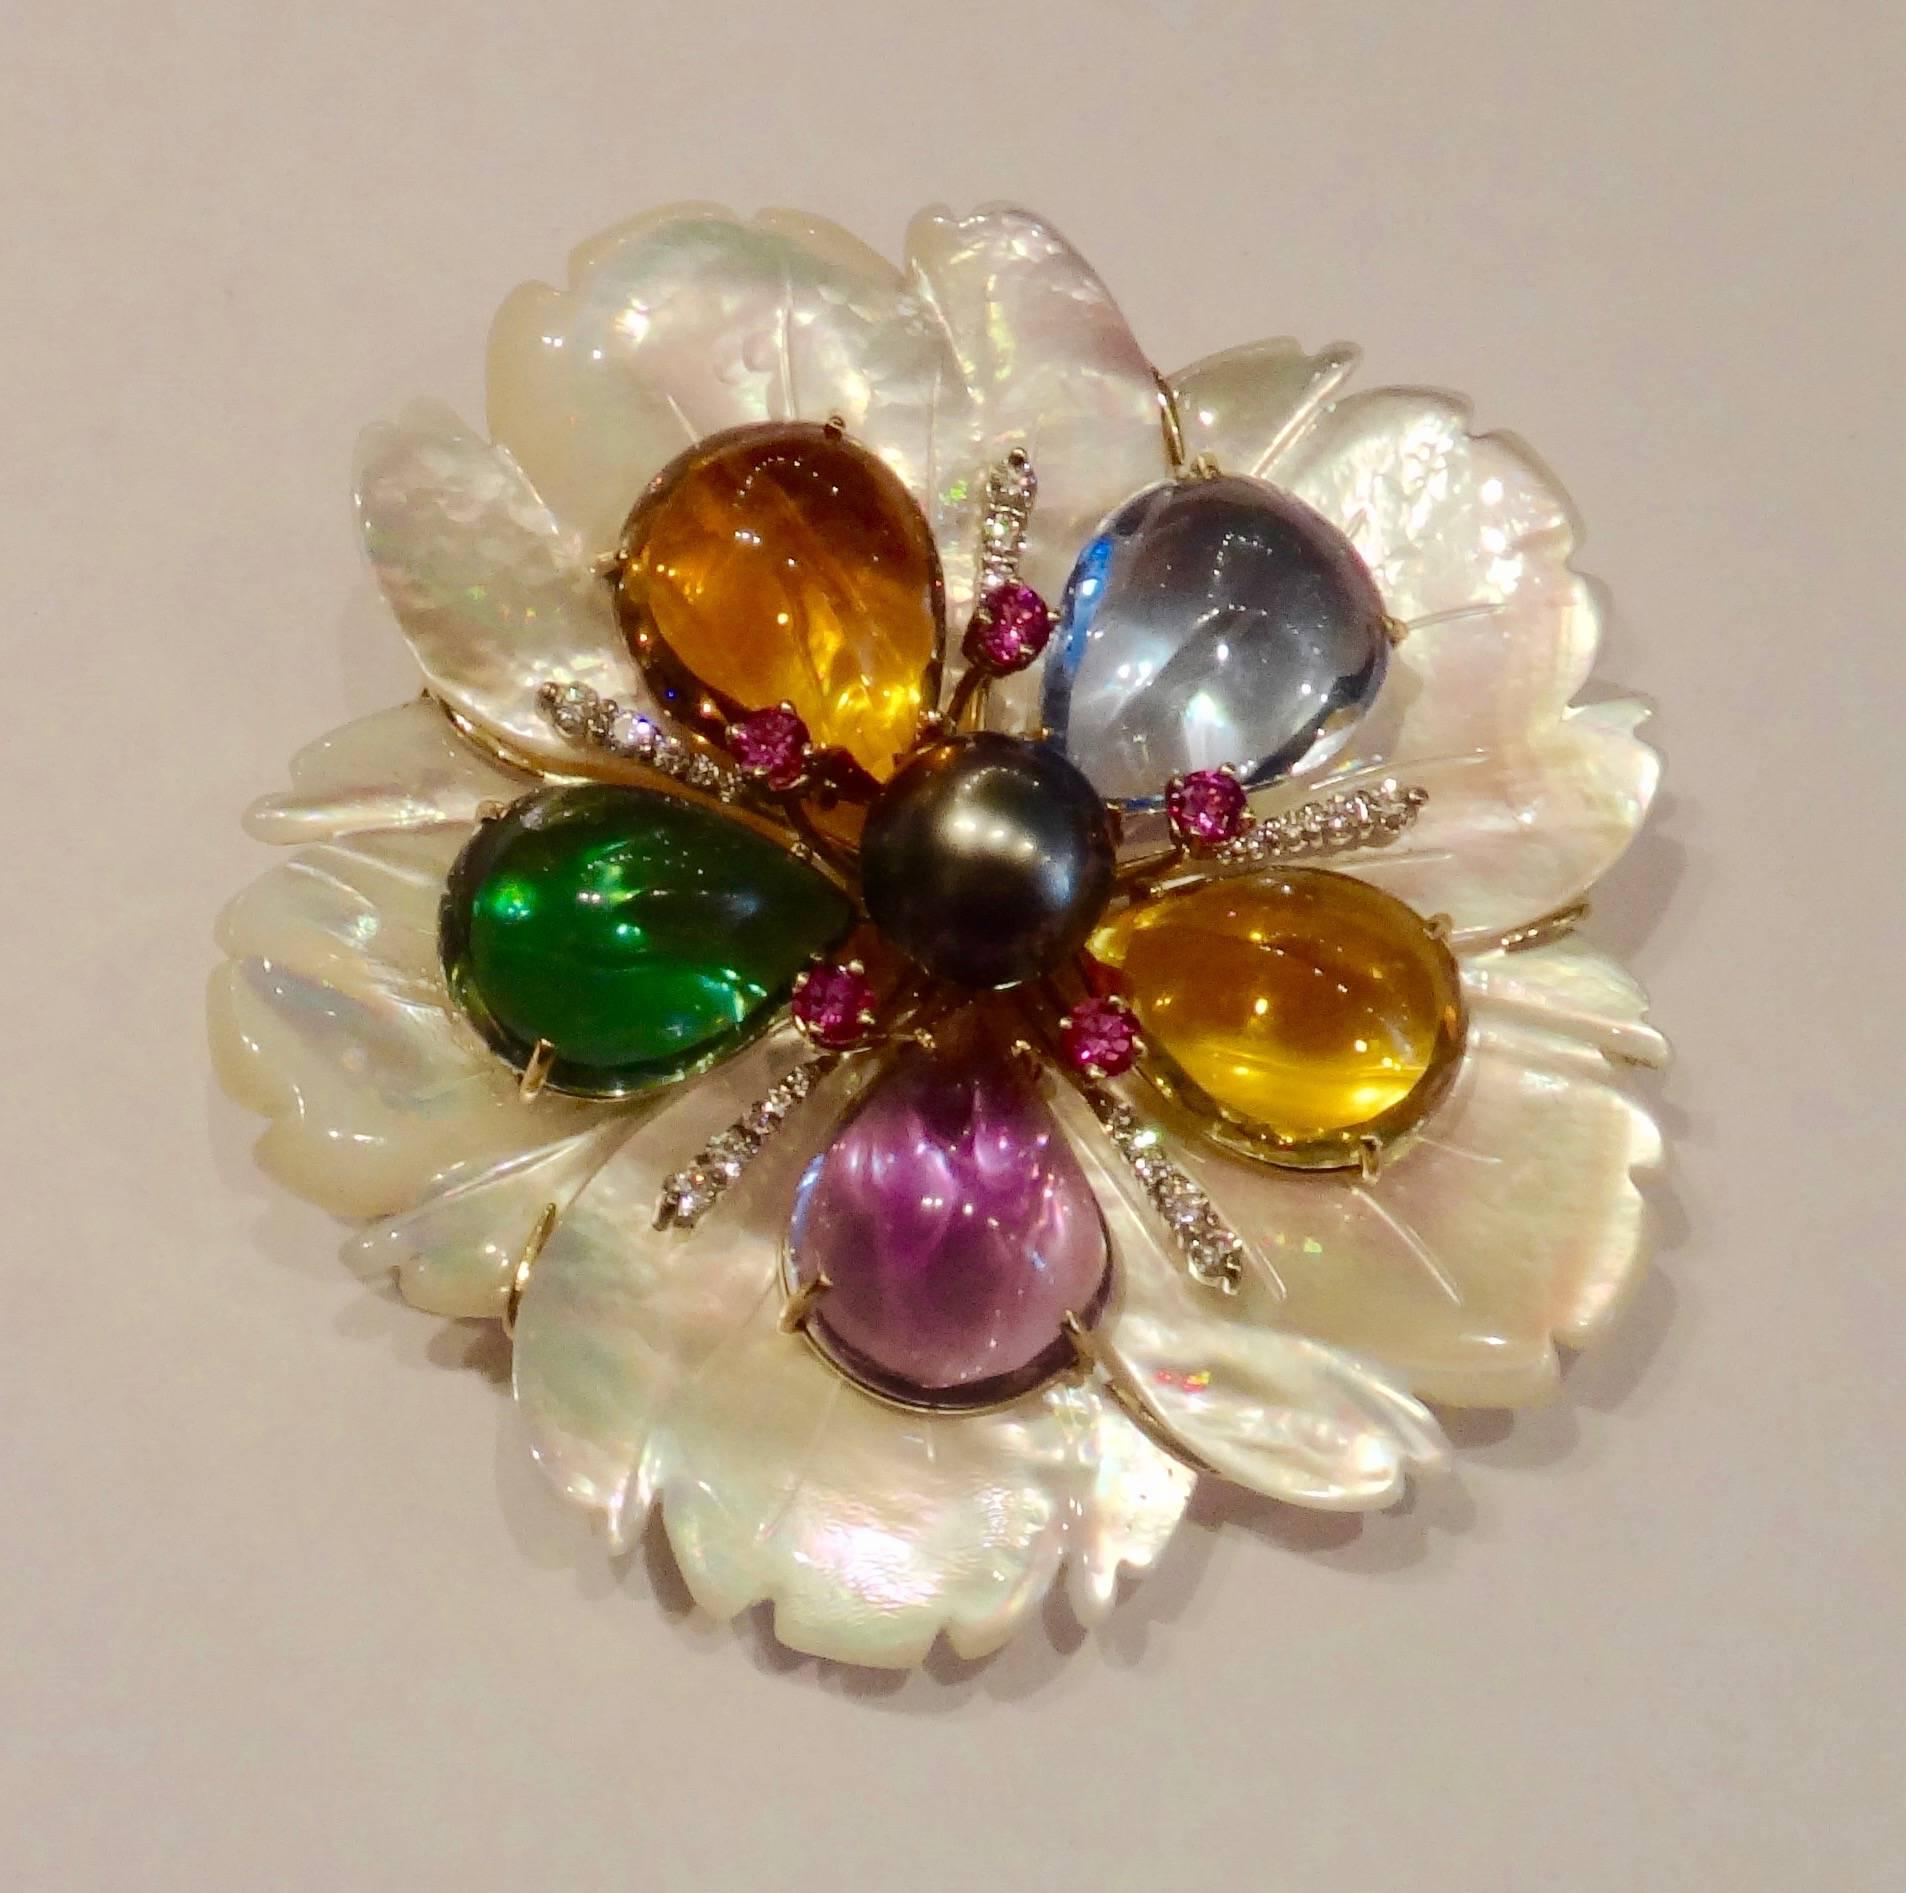 One-of-a-kind carved mother-of-pearl flower is decorated with pear shaped amethyst, citrine, blue topaz and green amethyst along with hot pink sapphires, a generously sized, gem quality Tahitian pearl and brilliant cut, white diamonds.  The piece